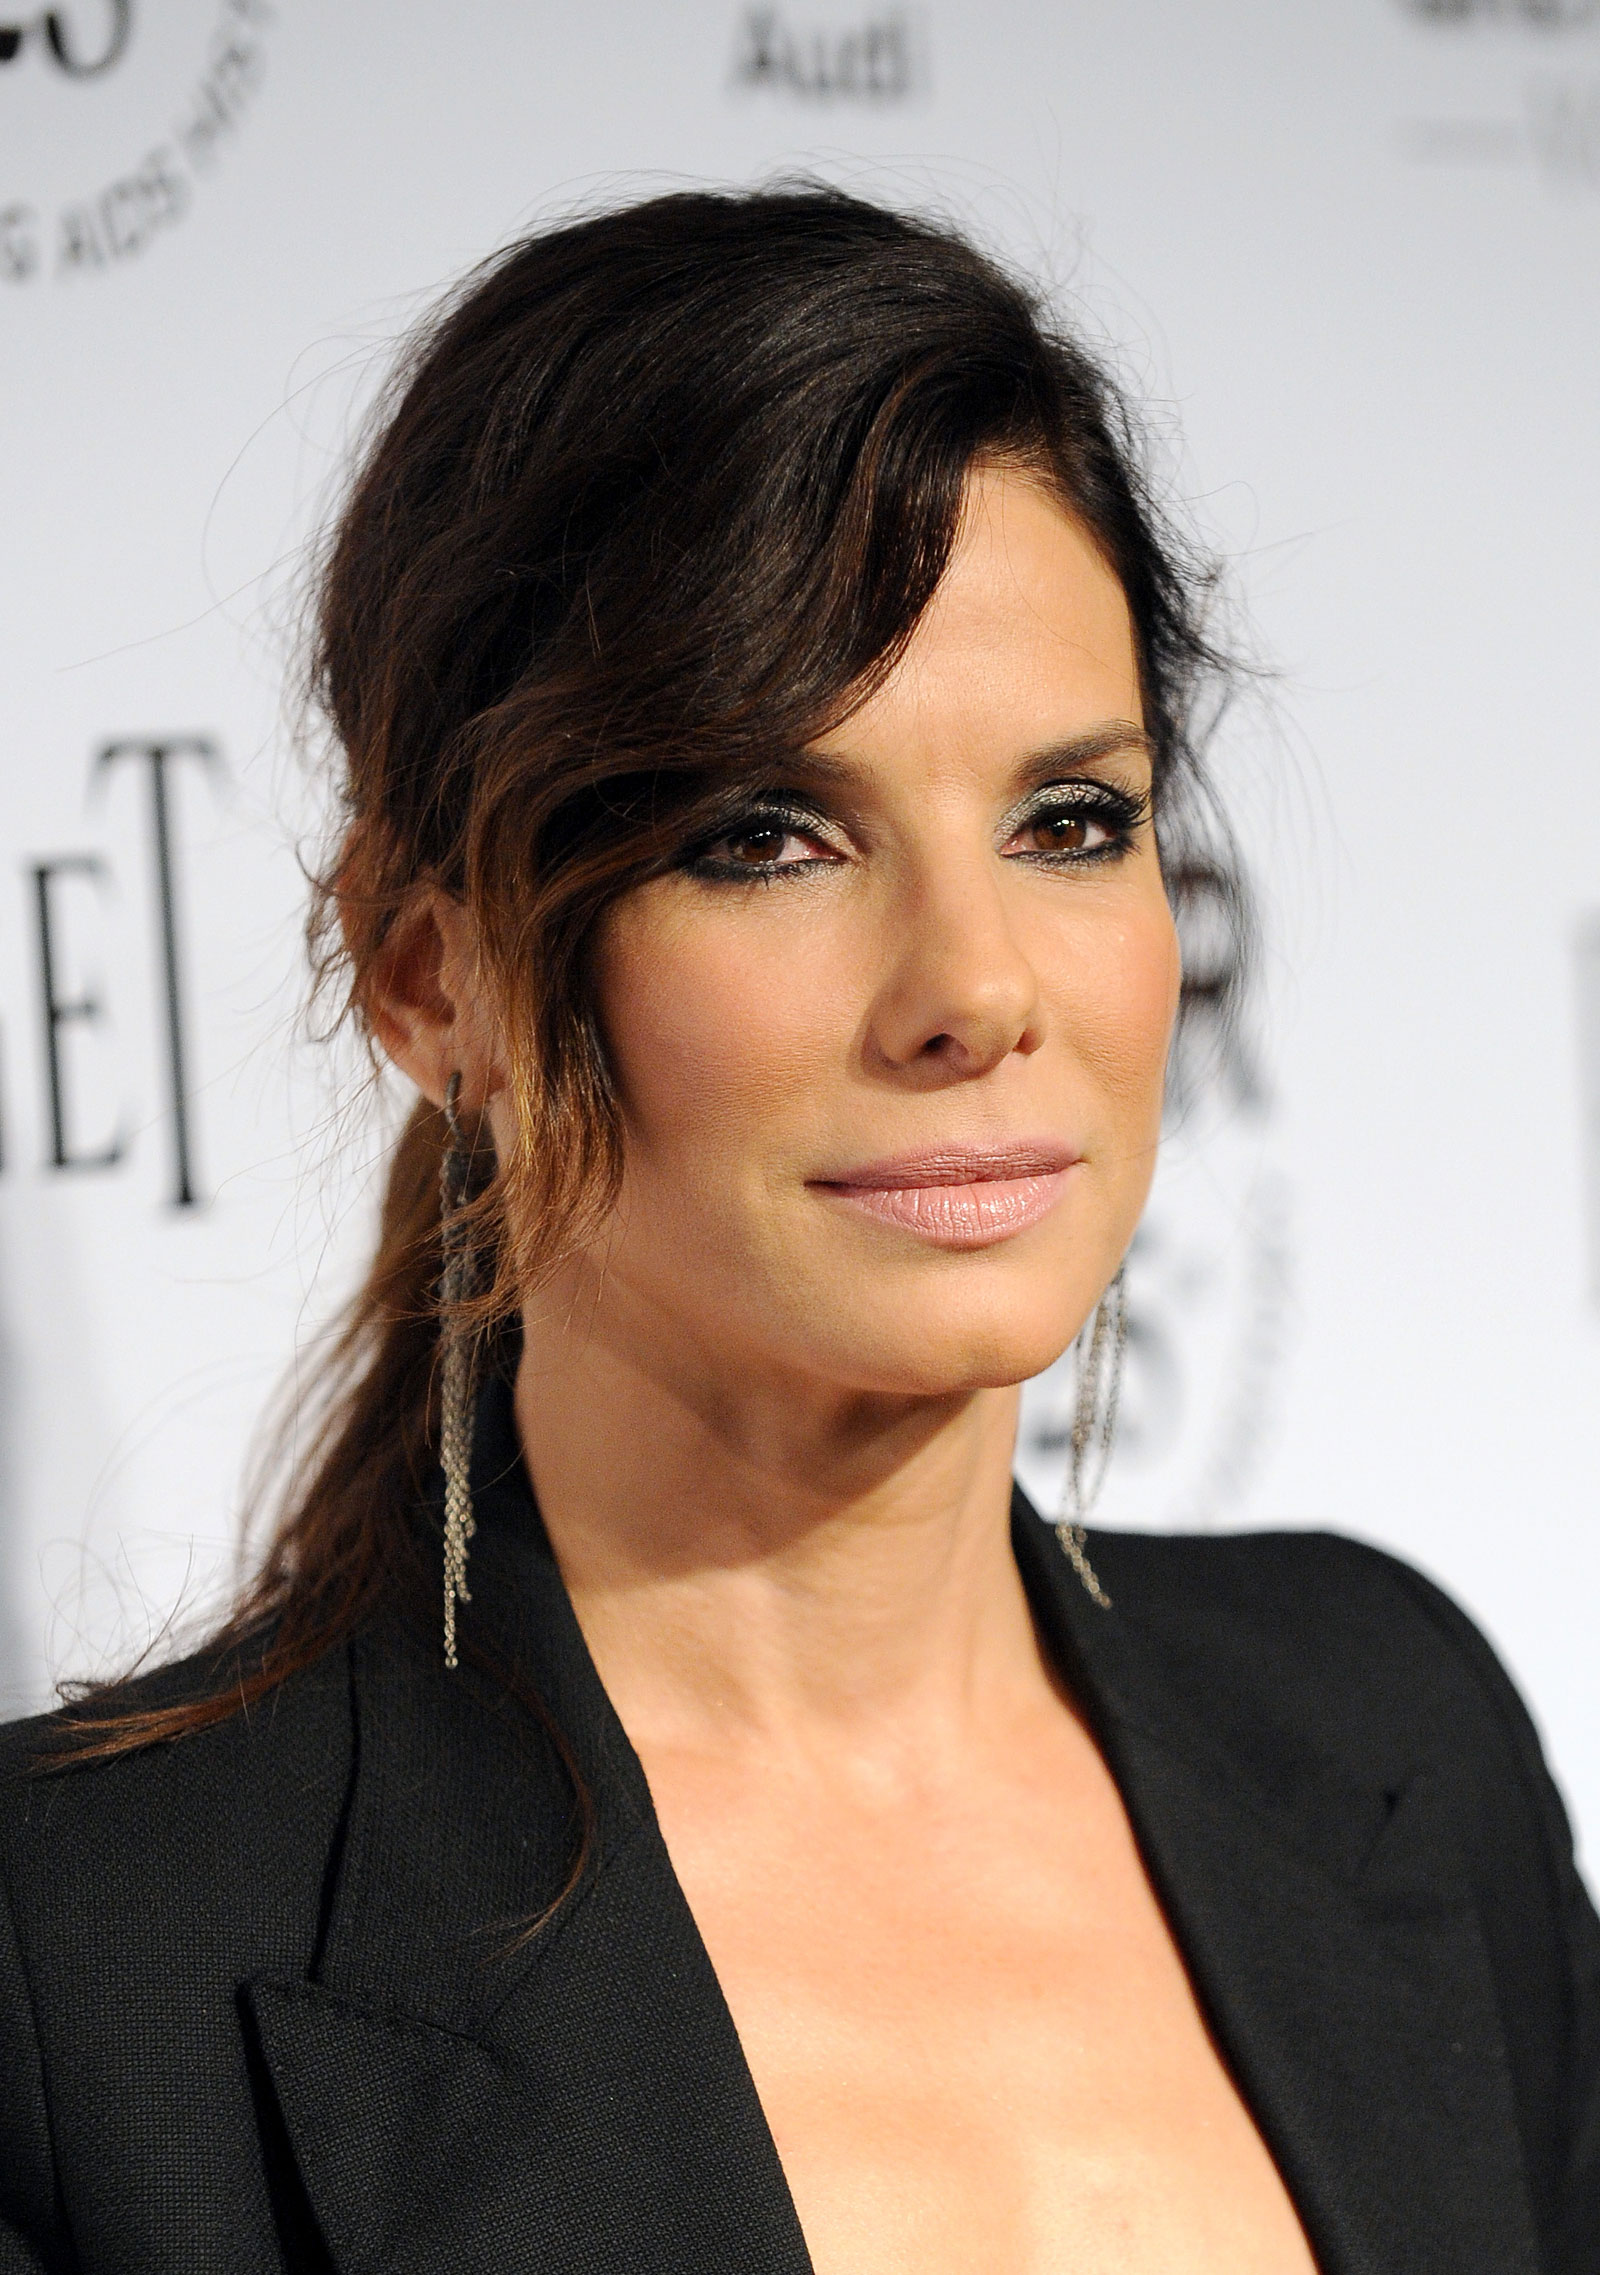 Sandra Bullock at amfAR The Foundation for Aids Research Inspiration ...